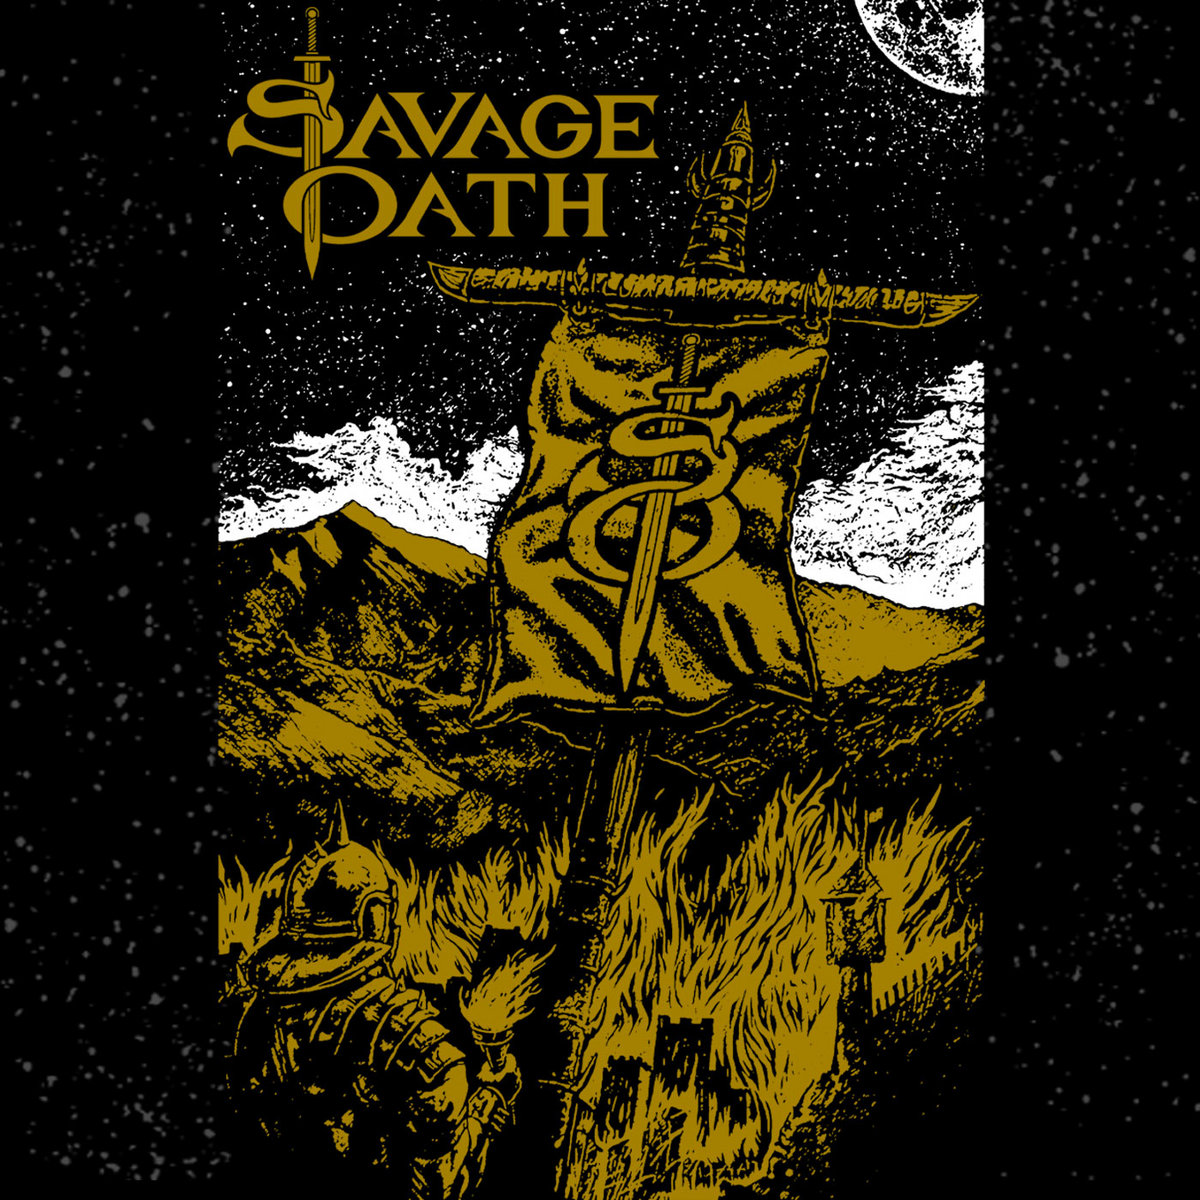 Encyclopaedia Metallum: The Metal Archives • View topic - Savage Oath - new  band with members of Visigoth/Sumerlands/Manilla Road/Eternal Champion/etc